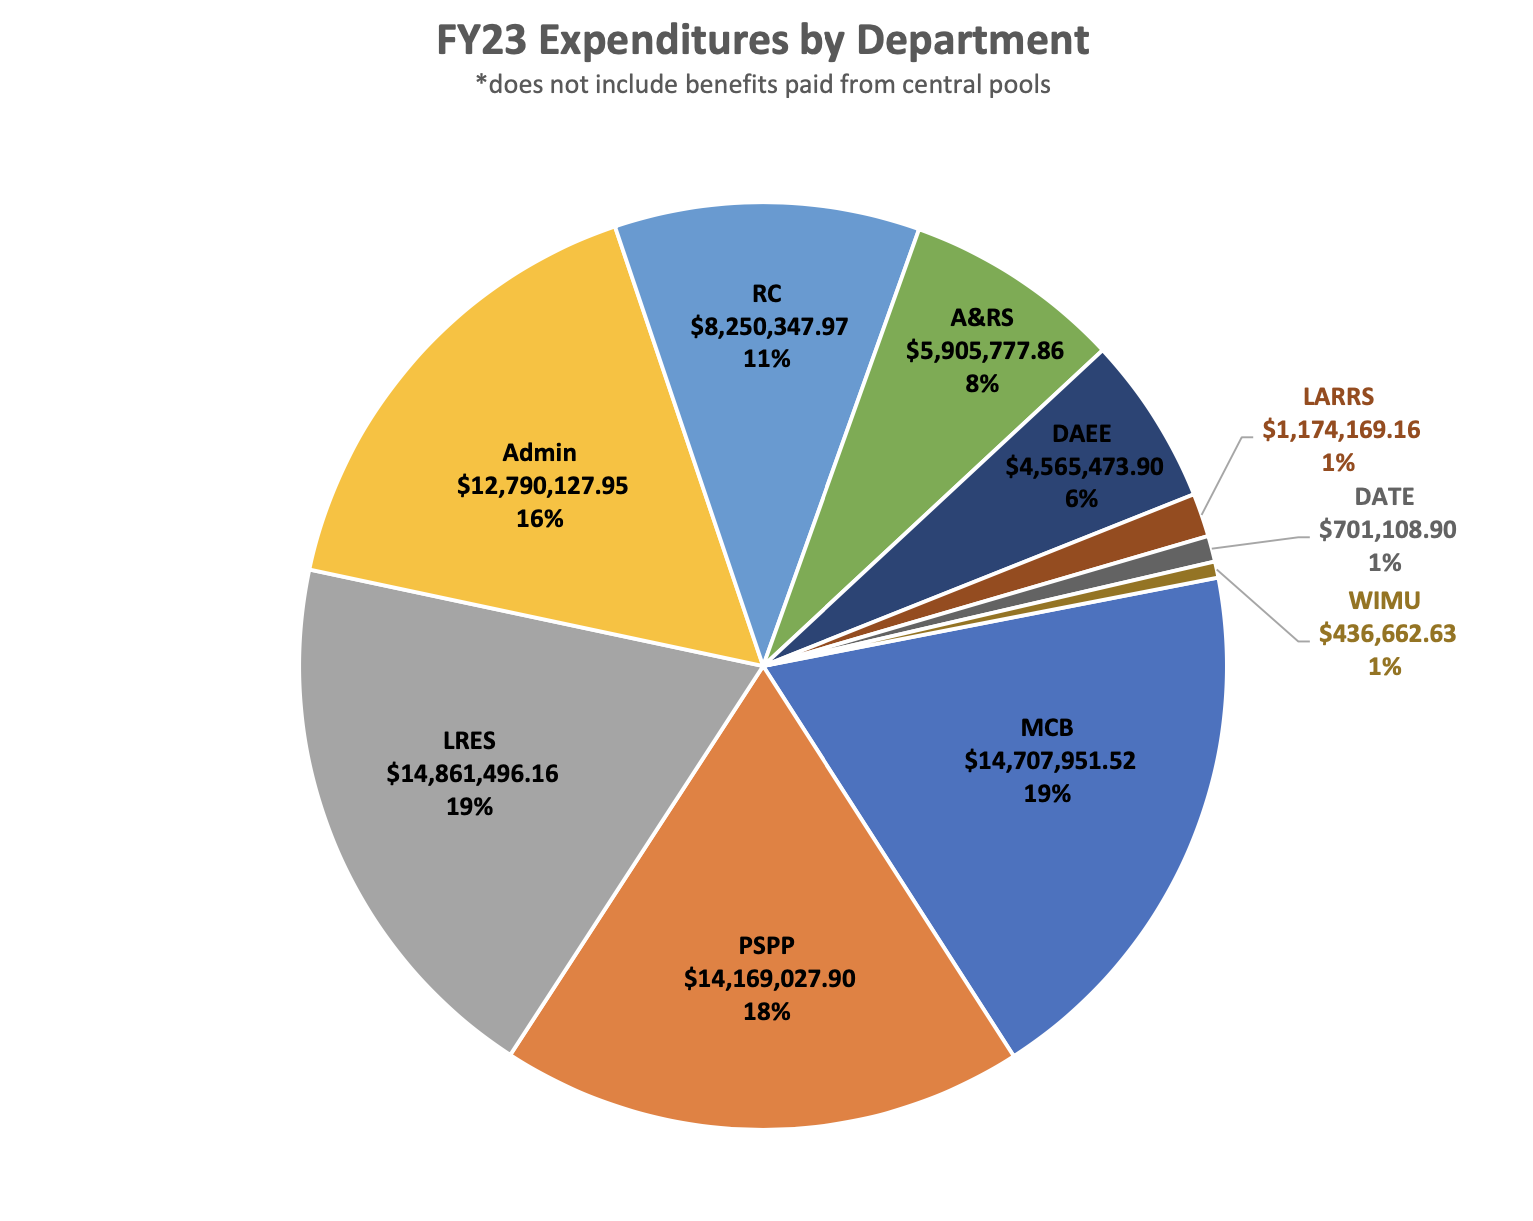 FY expenditures by department